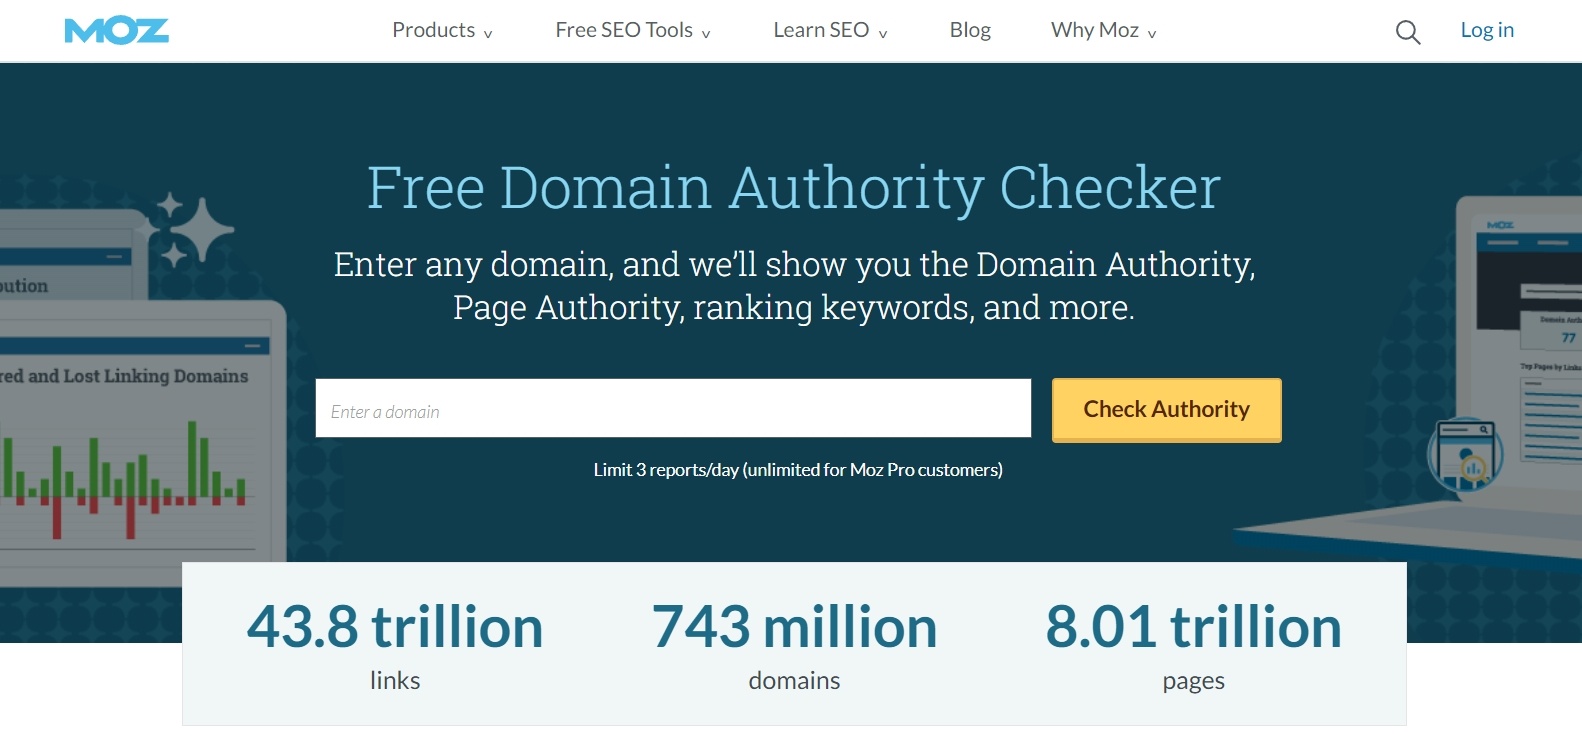 Use MOZ’s free domain checker to identify SEO strength and credibility of the blog